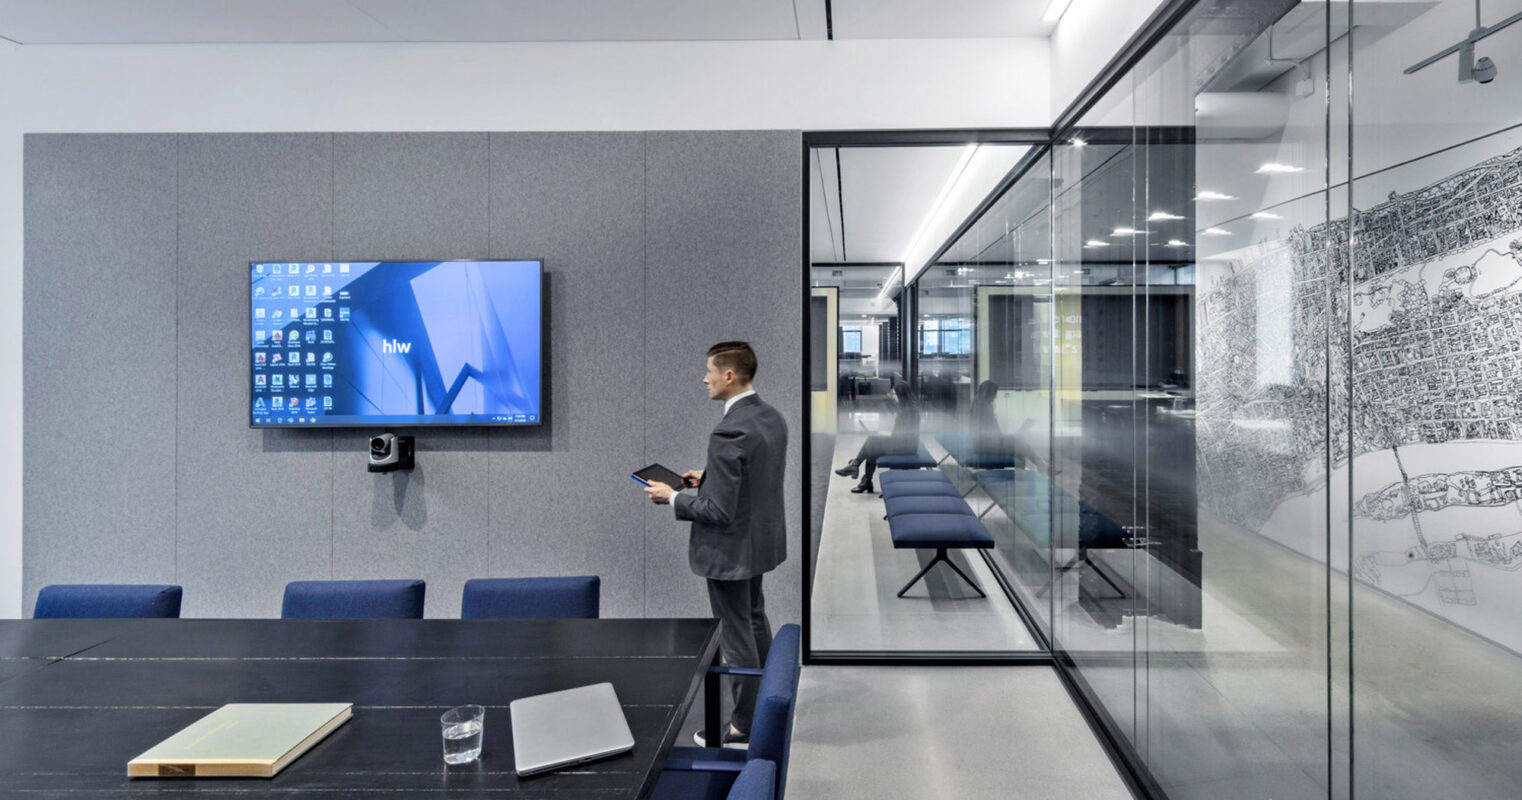 Modern office meeting room featuring sleek, glass walls, providing transparency and fostering a collaborative environment. The space is accentuated with a plush grey acoustic panel wall with an integrated flat-screen display, sophisticated furnishings, and innovative, detailed architectural drawings displayed as artistic elements. A professional stands, actively engaging with digital content.